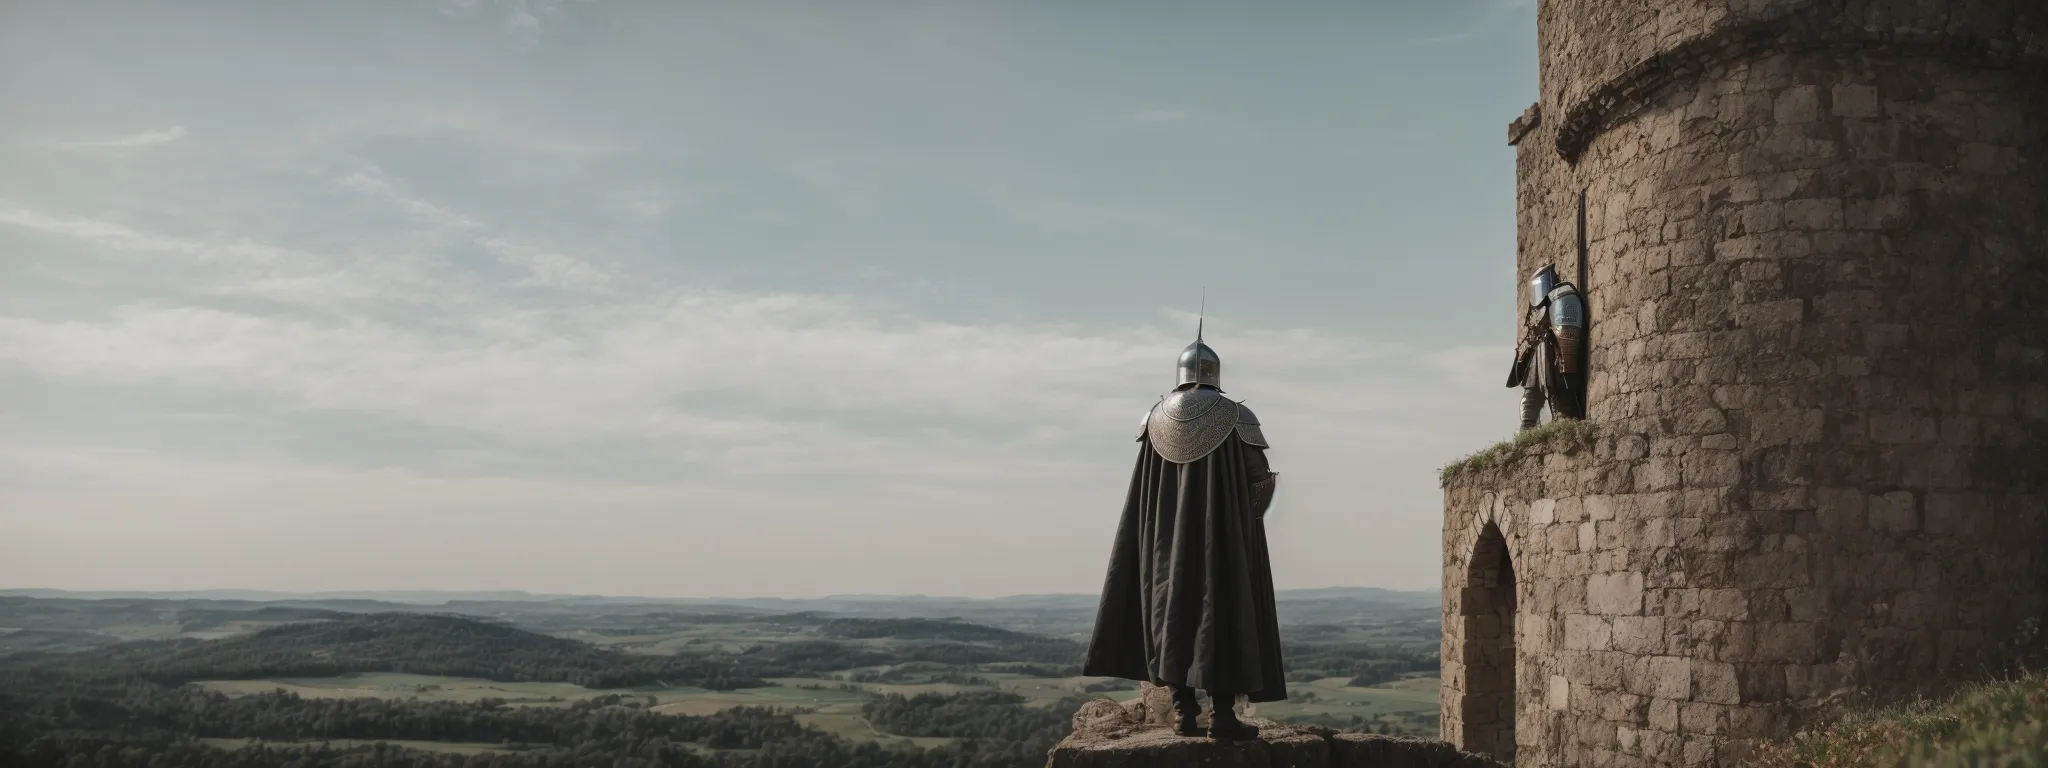 a knight in armor stands vigilant on a castle wall, scanning the distant horizon for approaching adversaries.